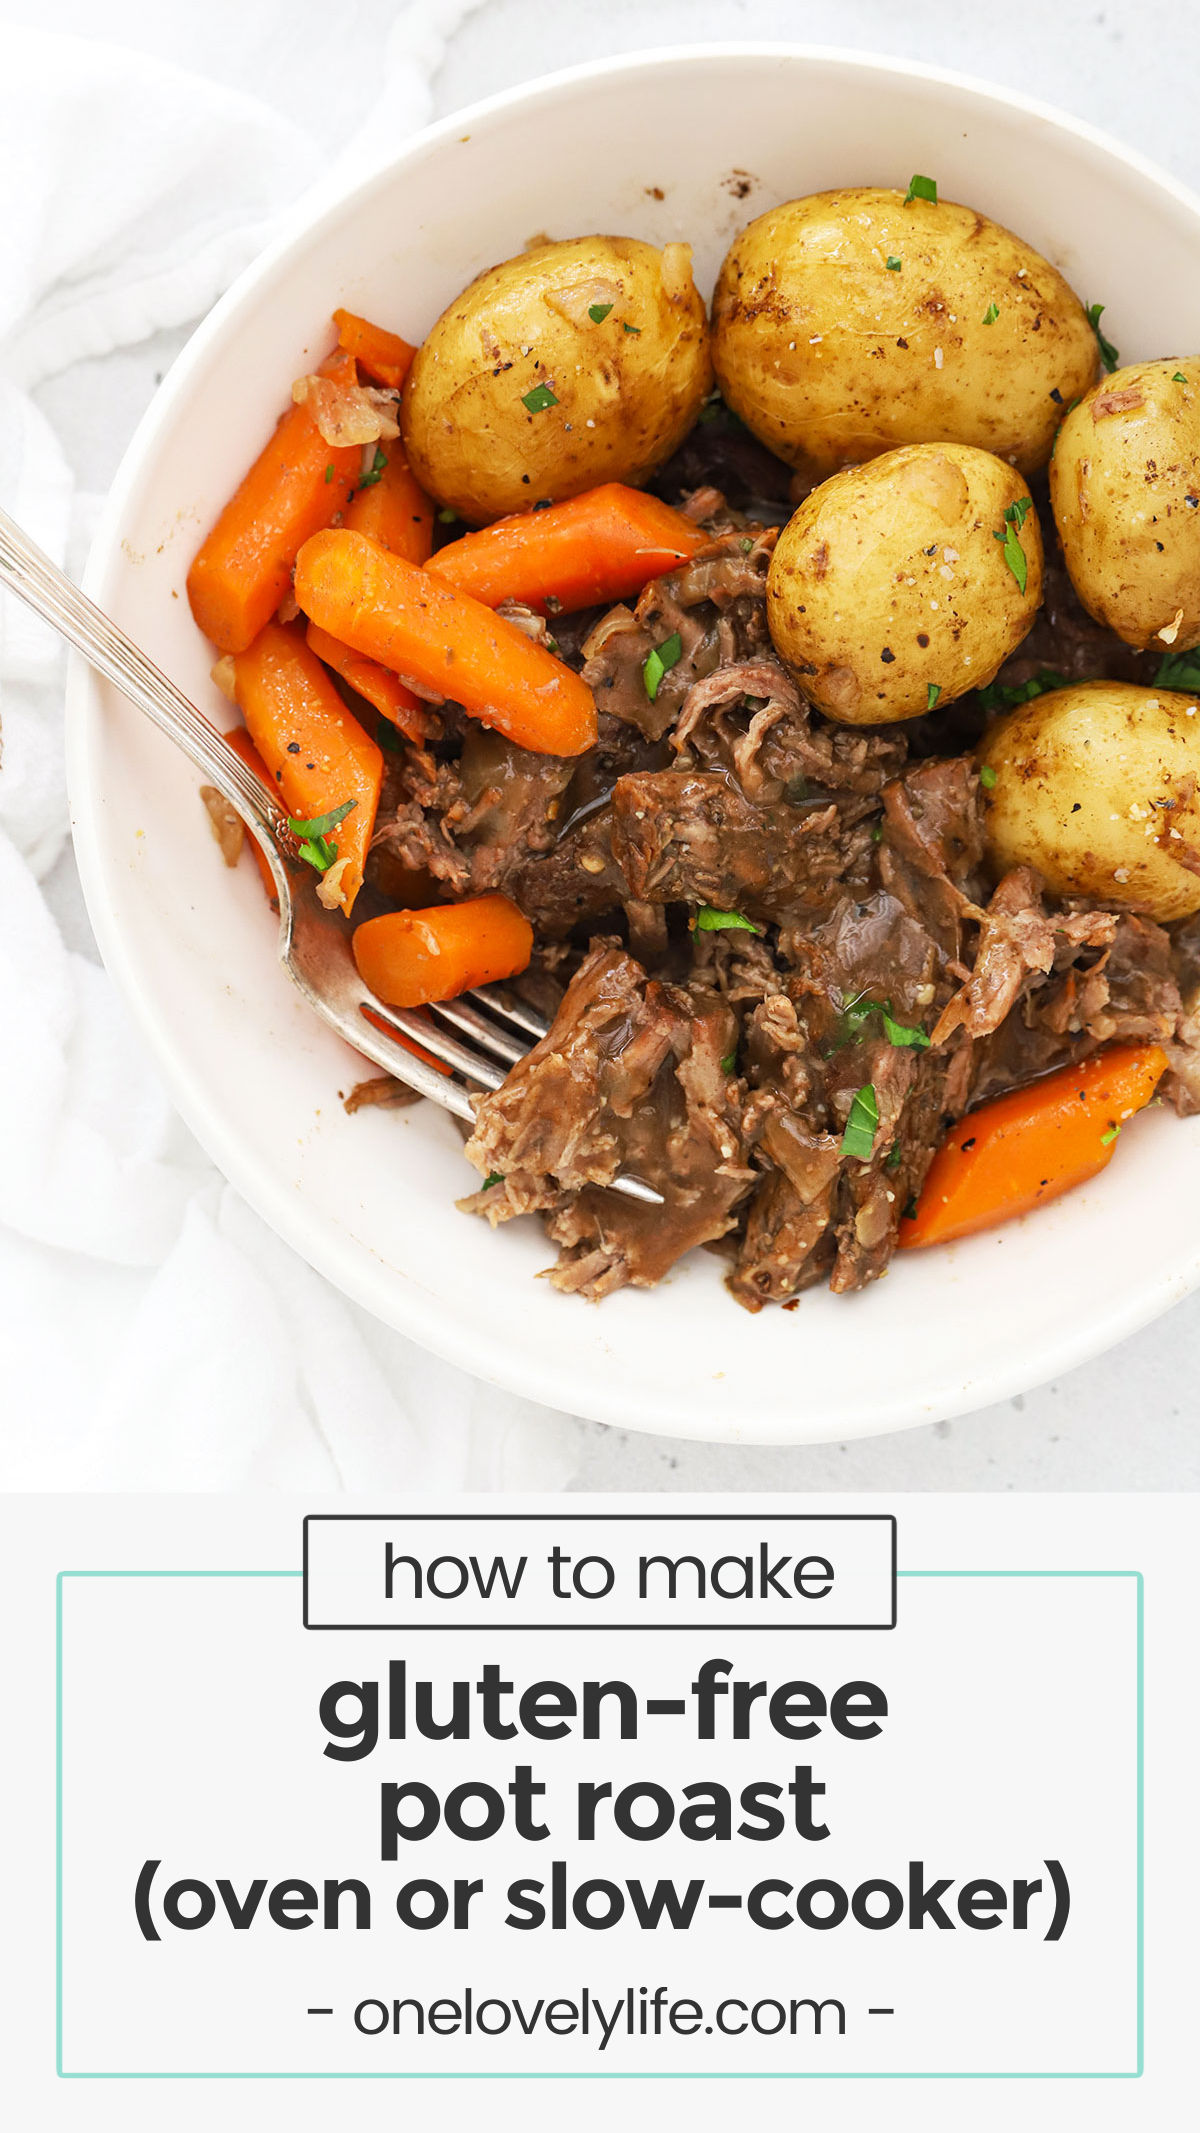 Learn how to make the best gluten-free pot roast in the oven OR slow cooker with this easy recipe! It's nourishing comfort food done right. // slow cooker gluten-free pot roast / dutch oven gluten-free pot roast / gluten-free pot roast recipe / easy gluten-free pot roast / gluten-free comfort food / crock pot gluten-free pot roast / crockpot gluten-free pot roast / gluten-free pot roast in the oven / gluten-free pot roast with gravy /